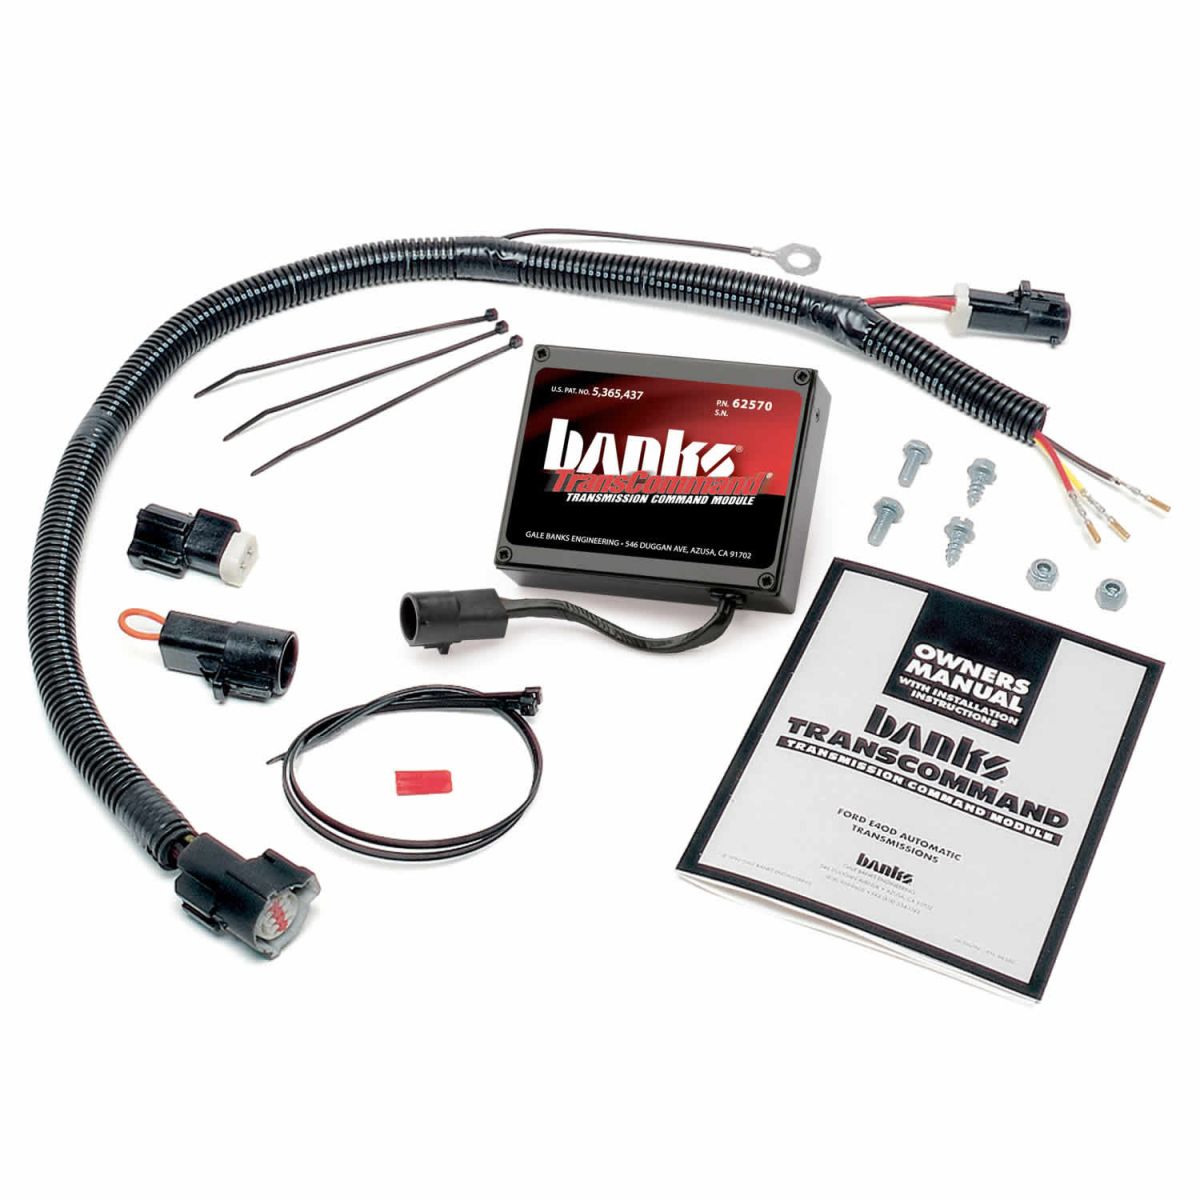 Banks Power - Banks Power Transcommand Automatic Transmission Management Computer Ford 4R100 Transmission